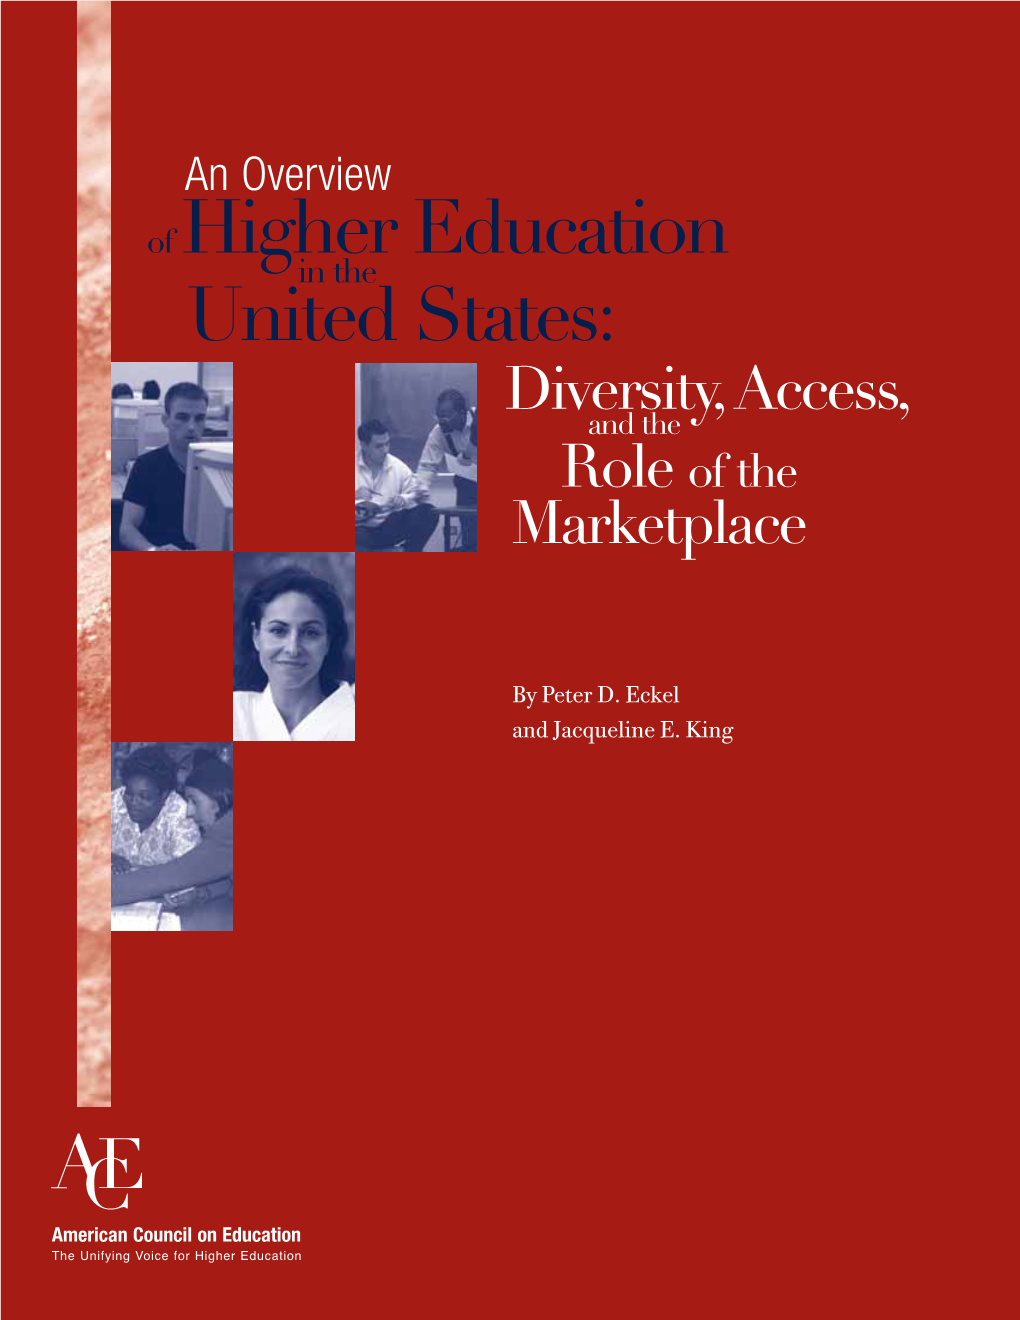 An Overview of Higher Education in the United States: Diversity,Access, and the Role of the Marketplace